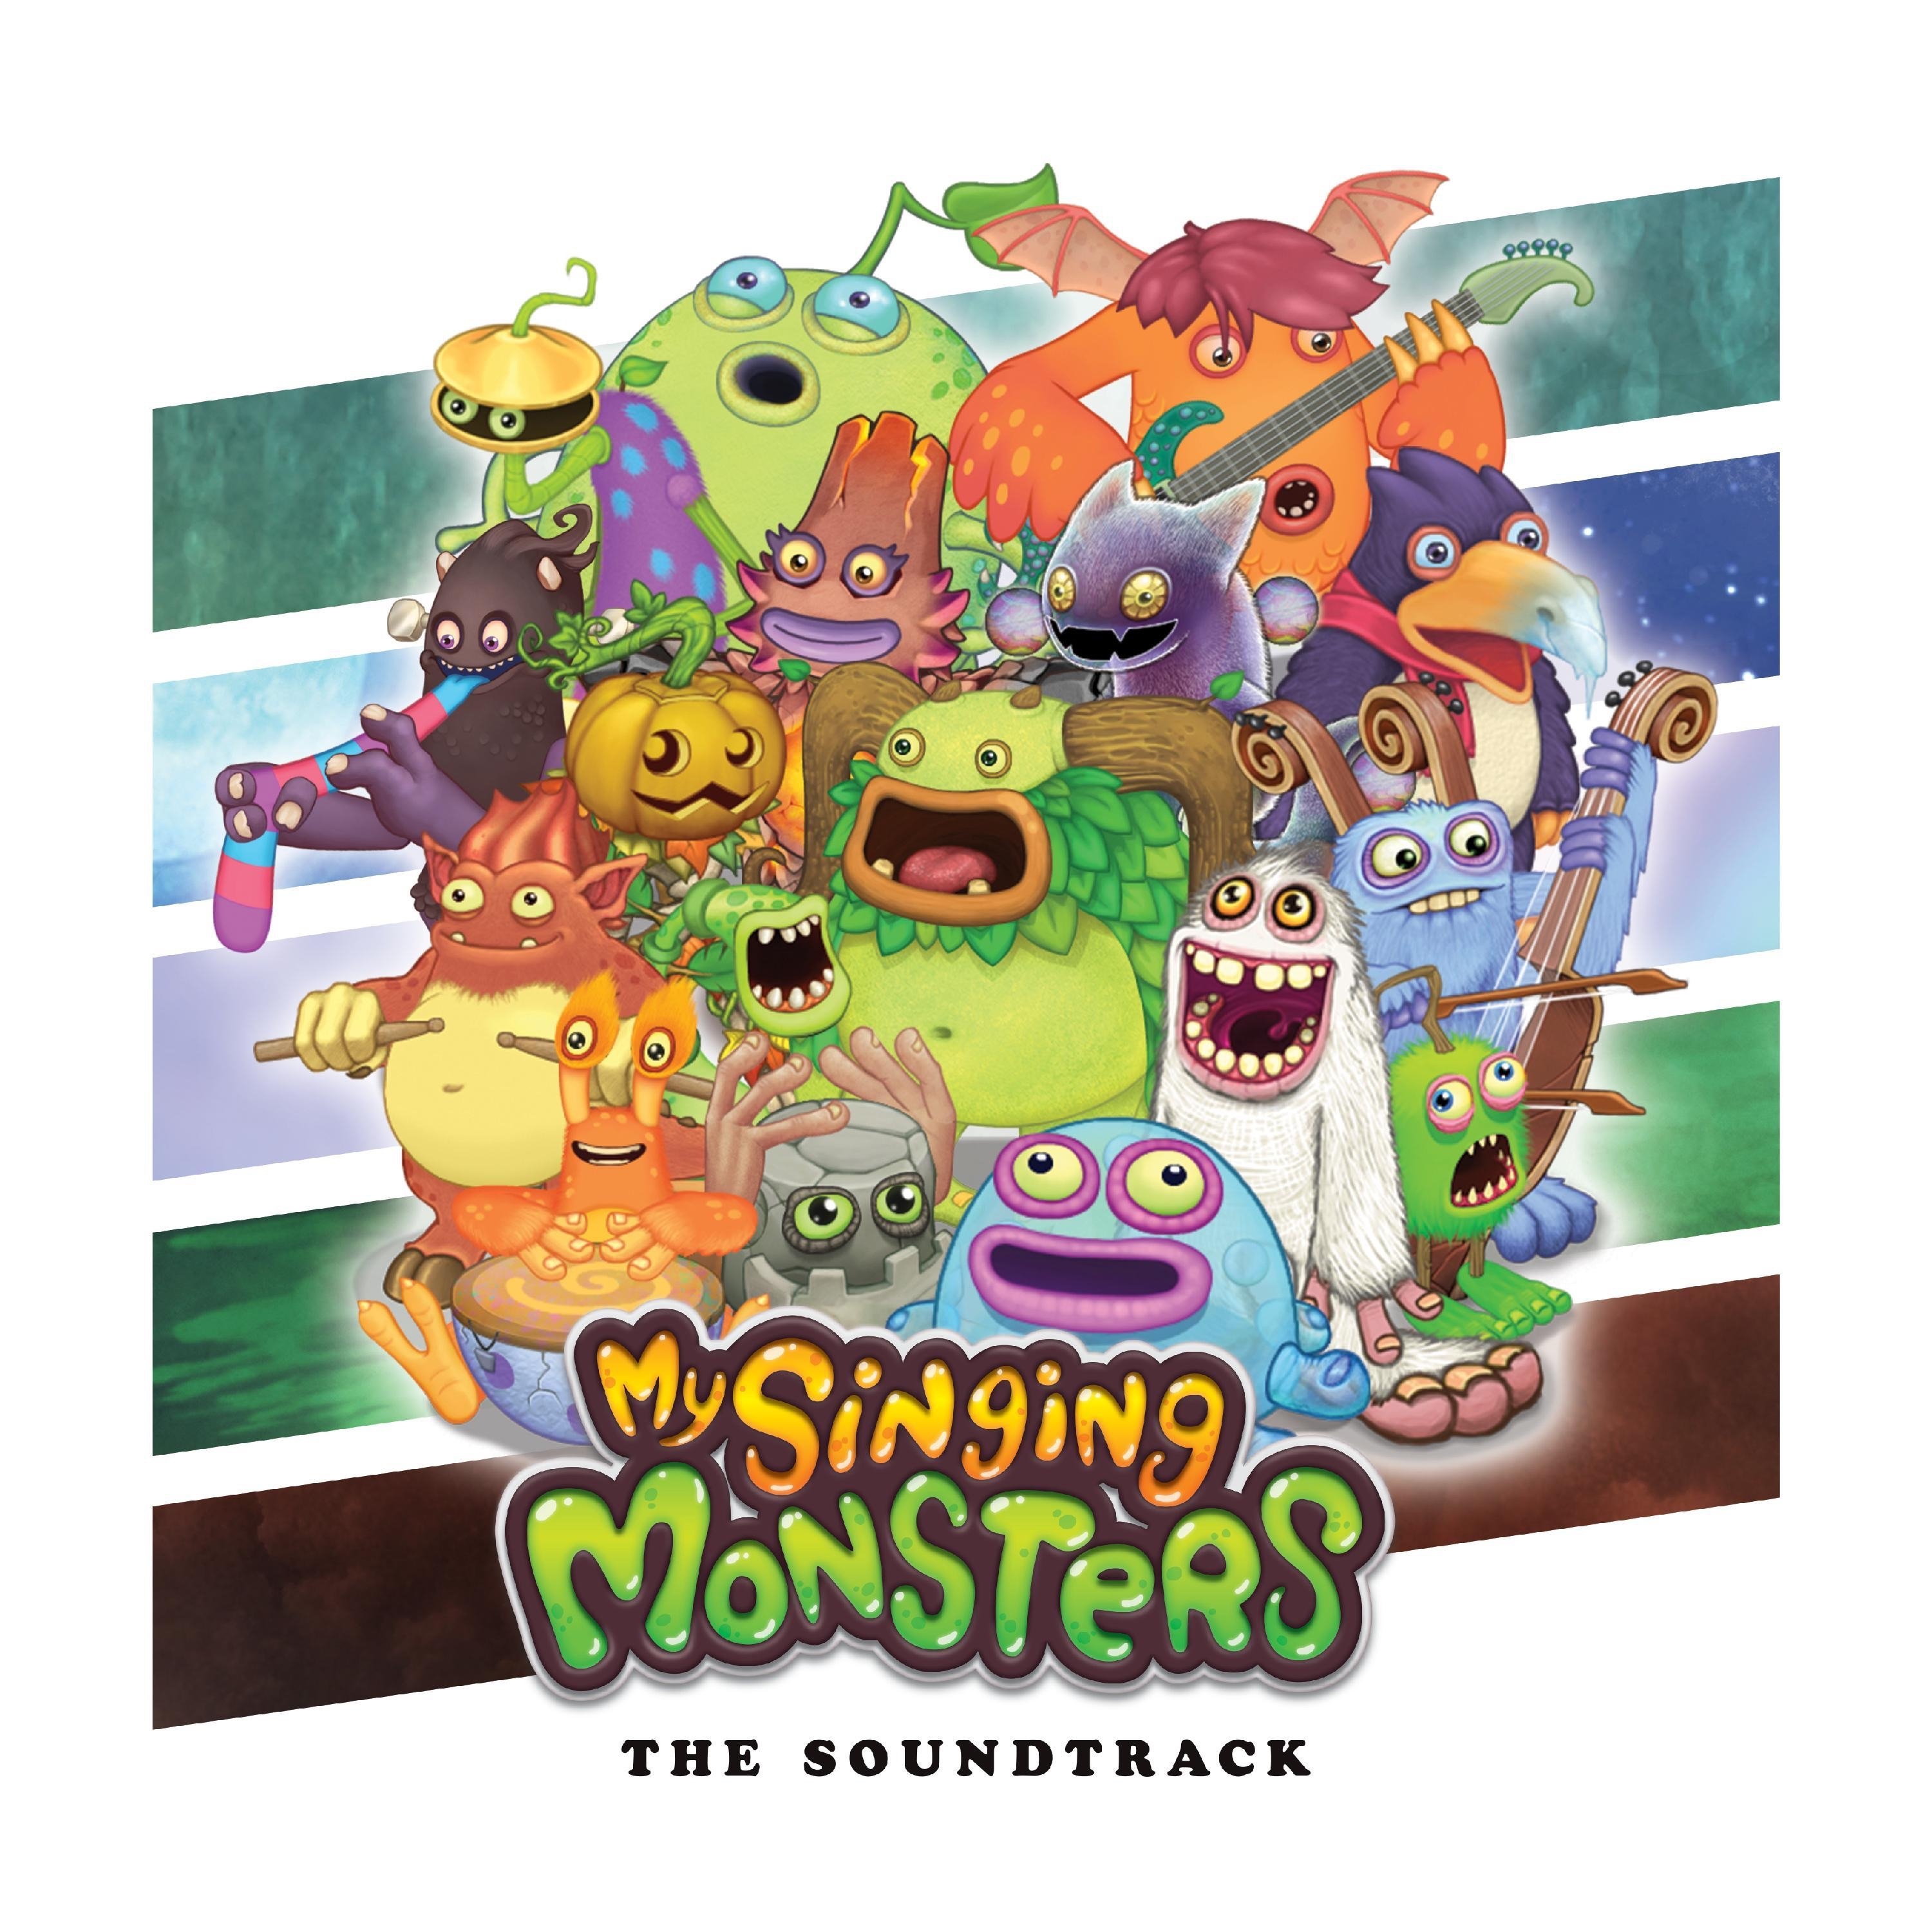 My Singing Monsters: Wubbox Monster Plant Island Gameplay Trailer [HD] on  Make a GIF